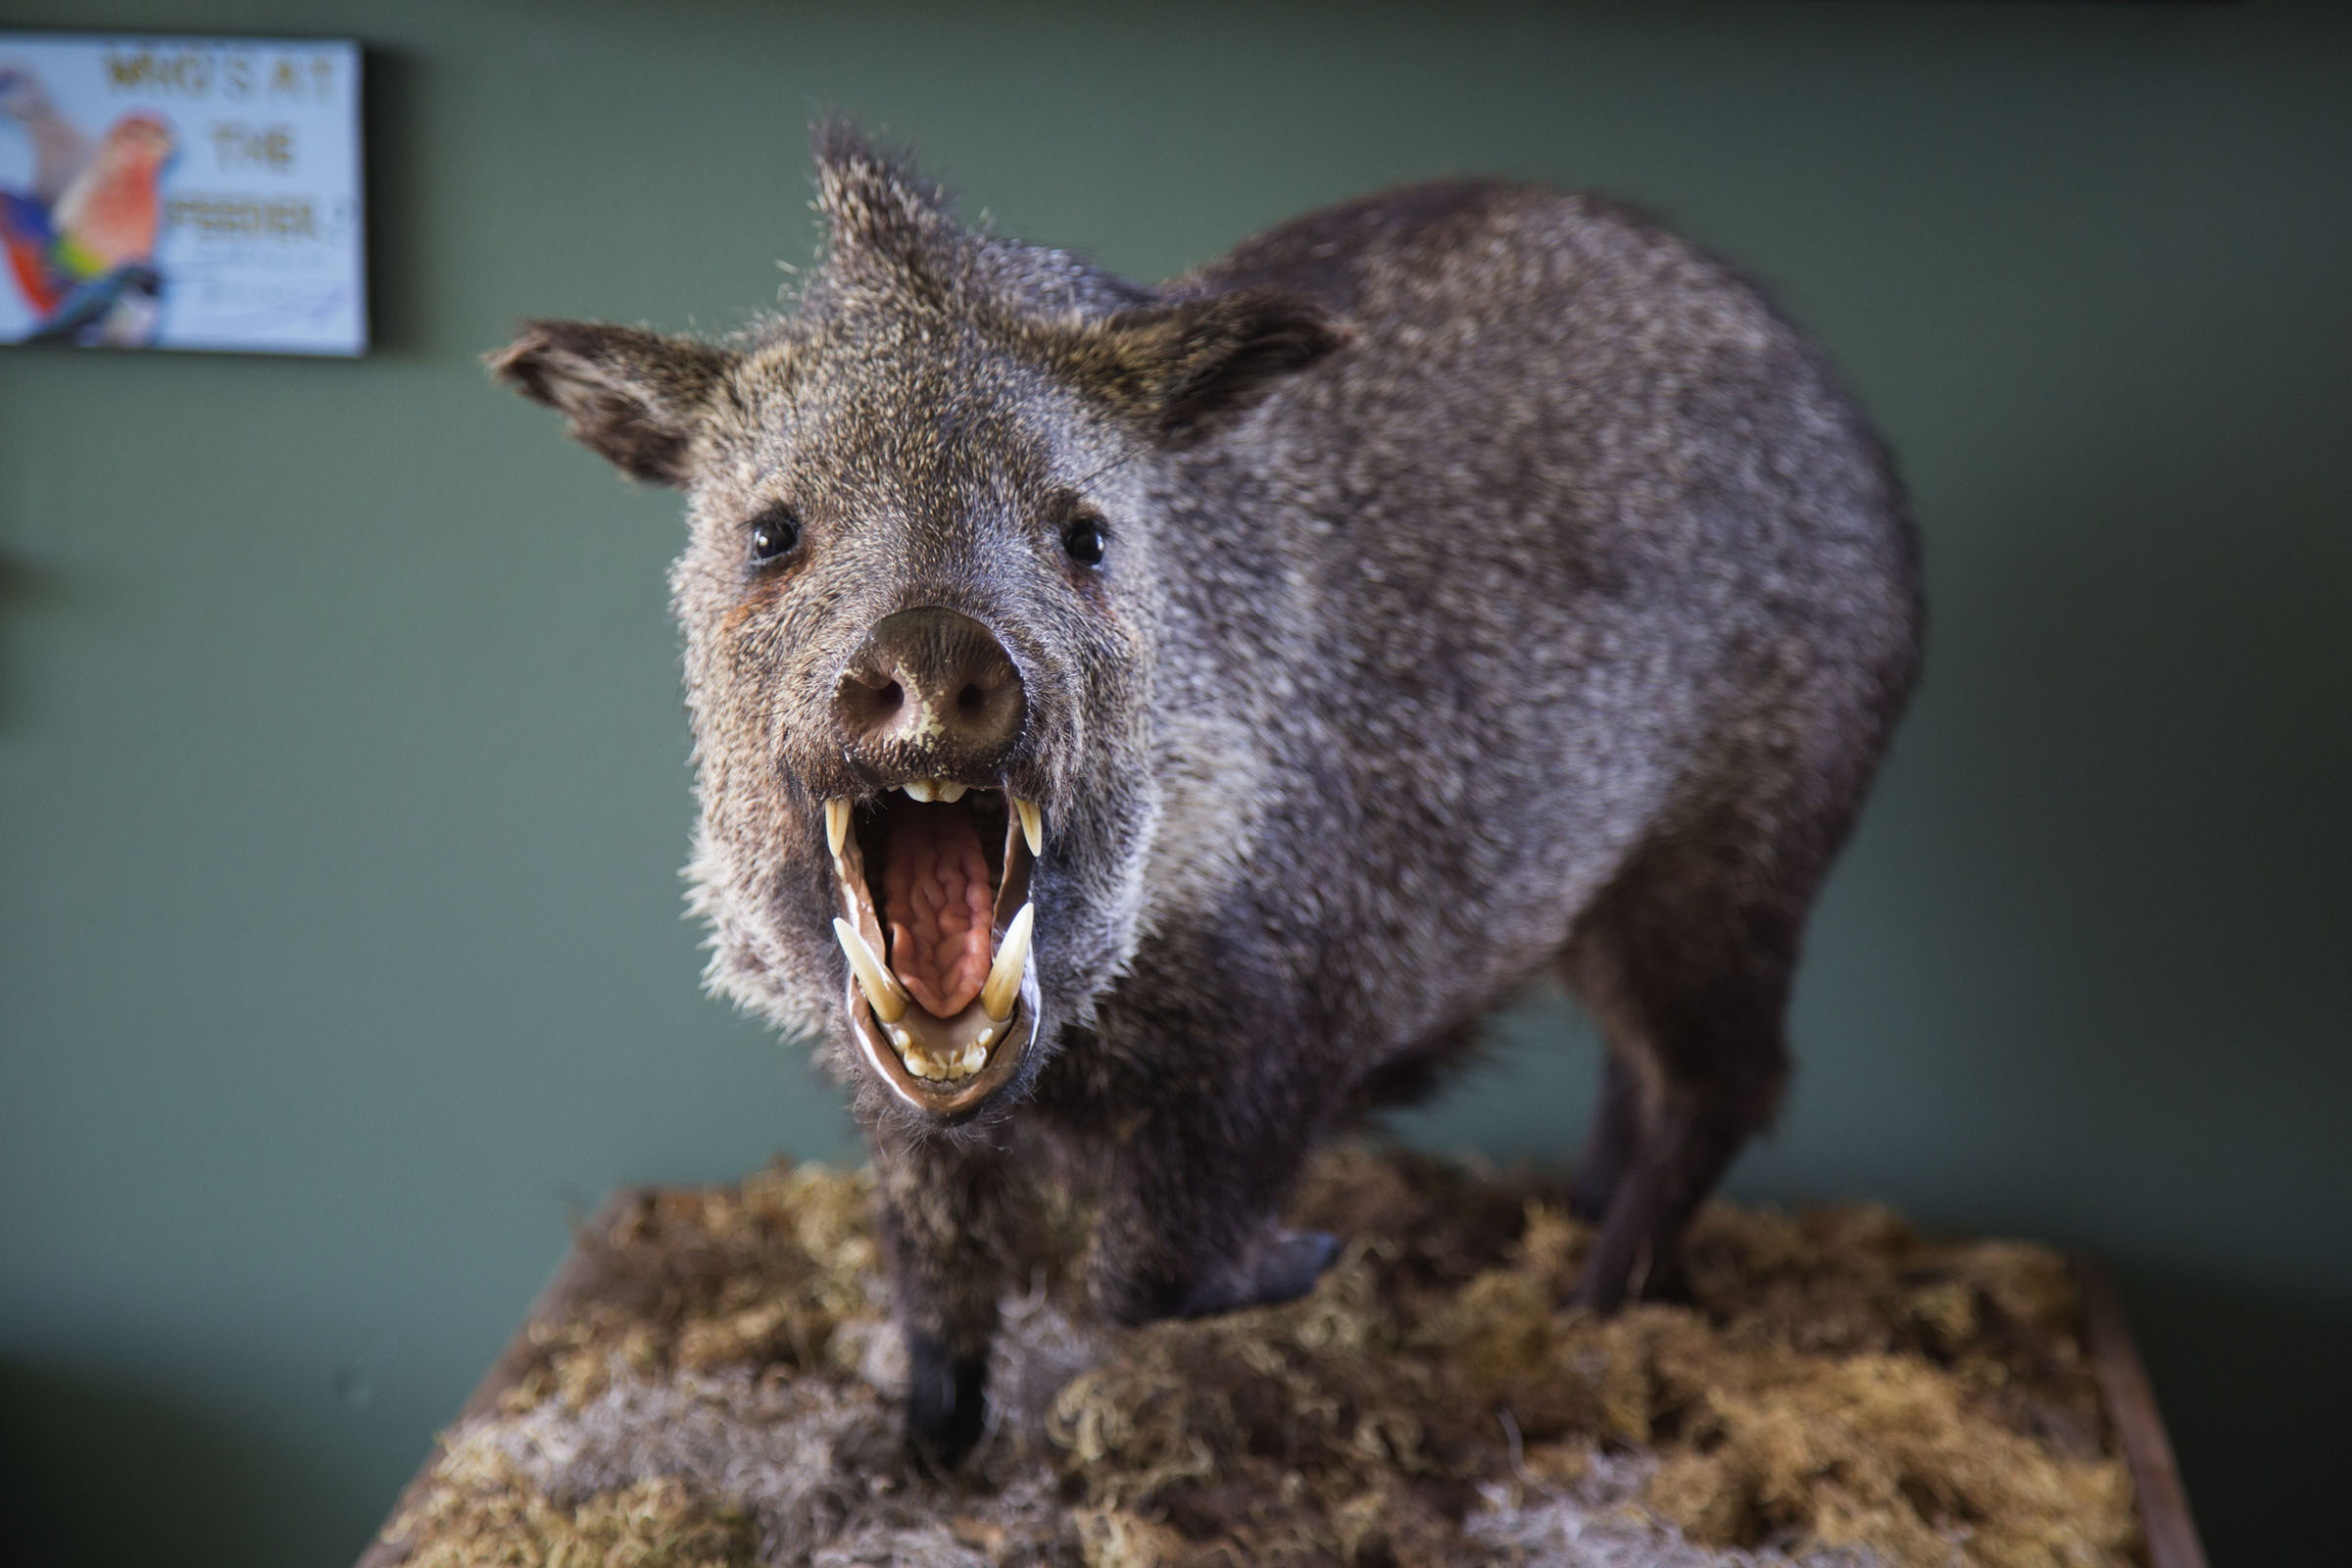 A taxidermy javelina opens its mouth towards the camera.